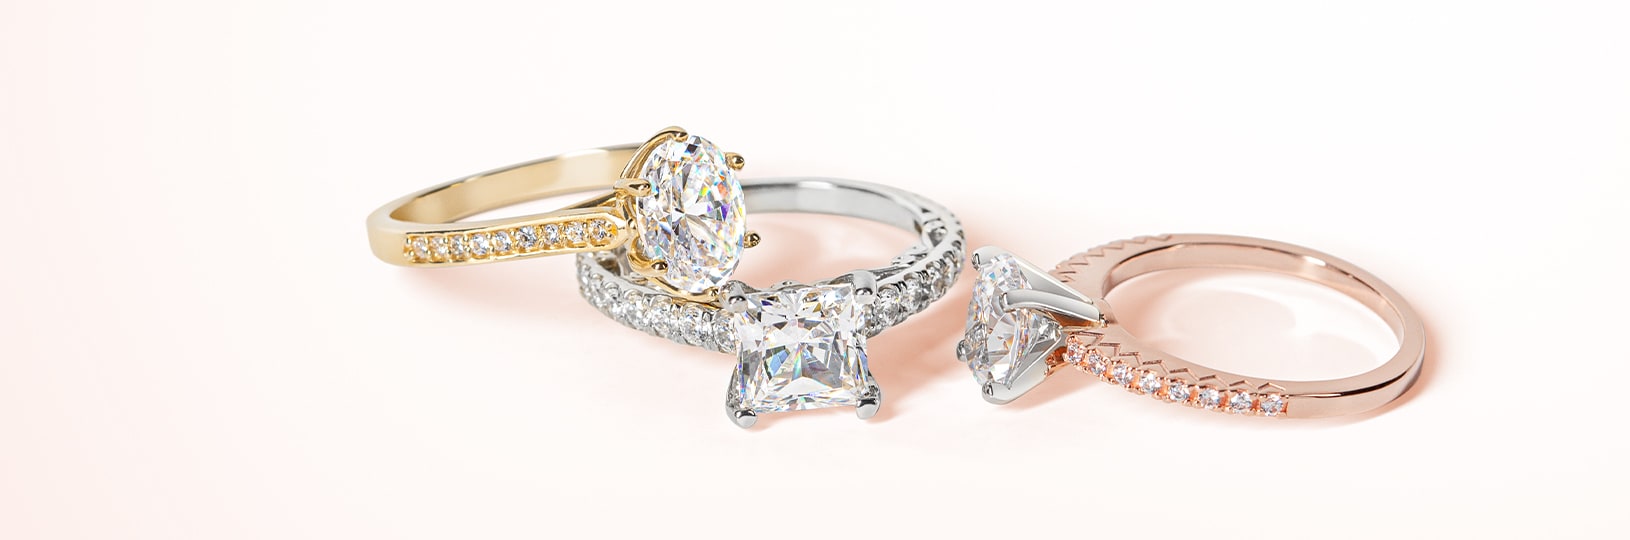 Yellow gold, white gold and rose gold engagement rings